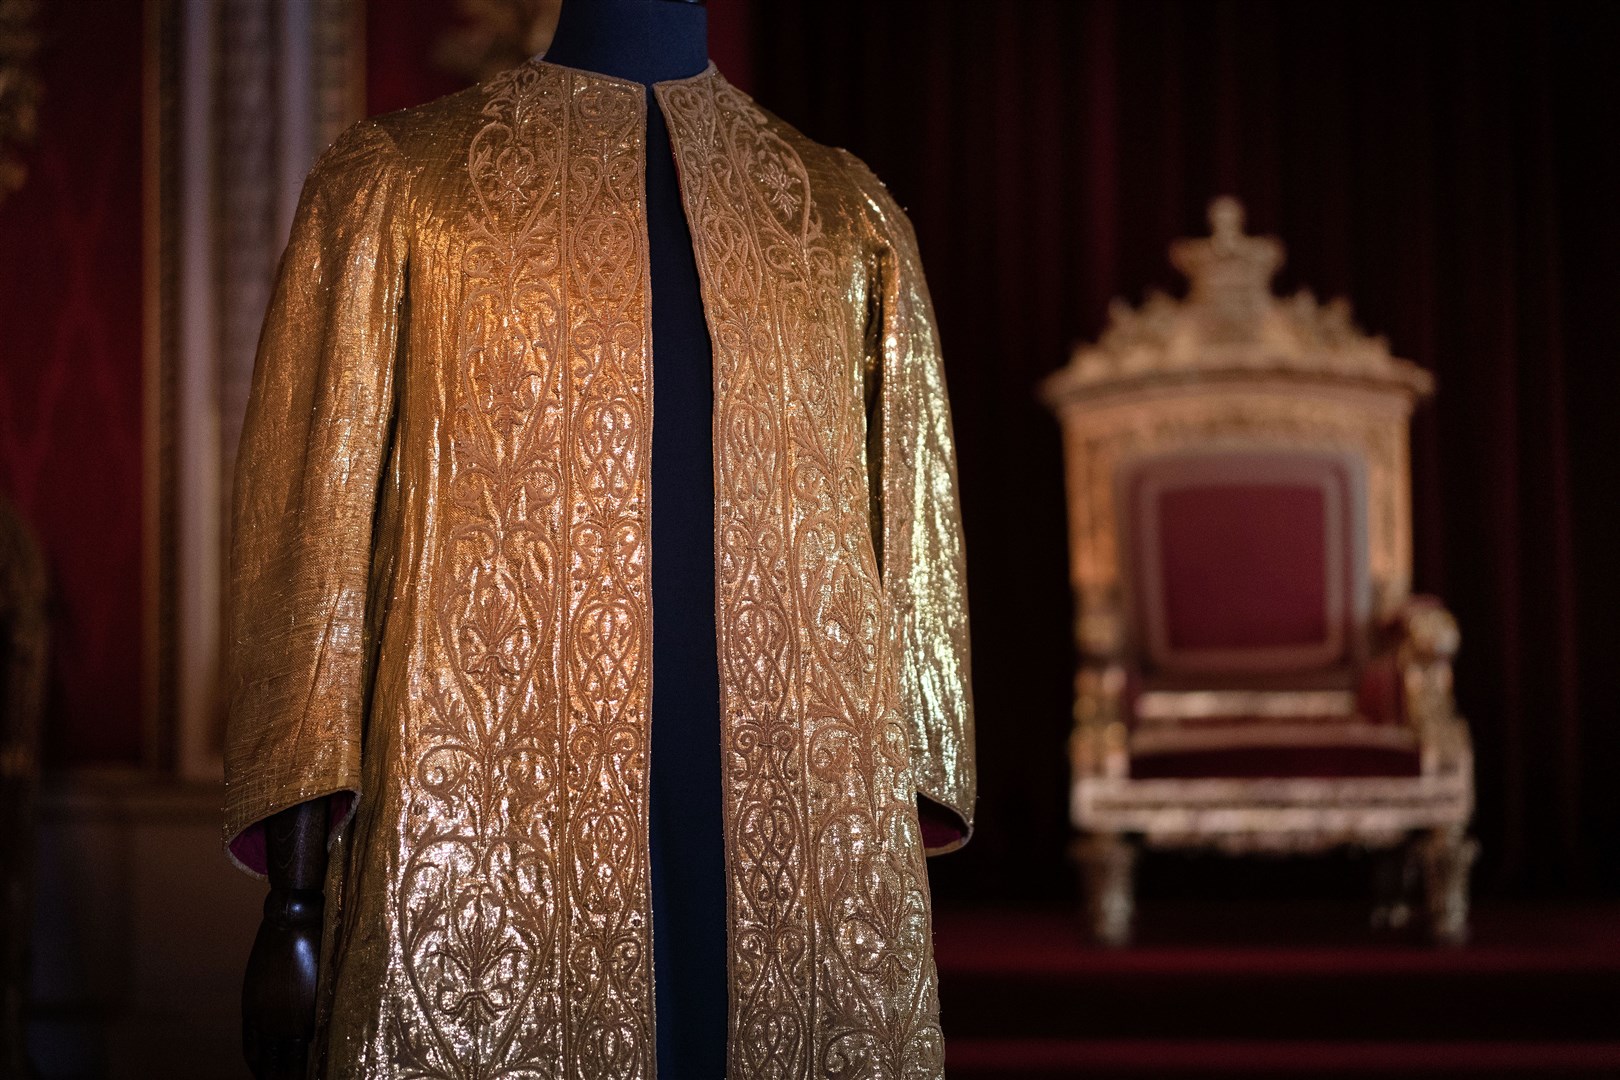 The Supertunica which forms part of the Coronation Vestments (Victoria Jones/PA)